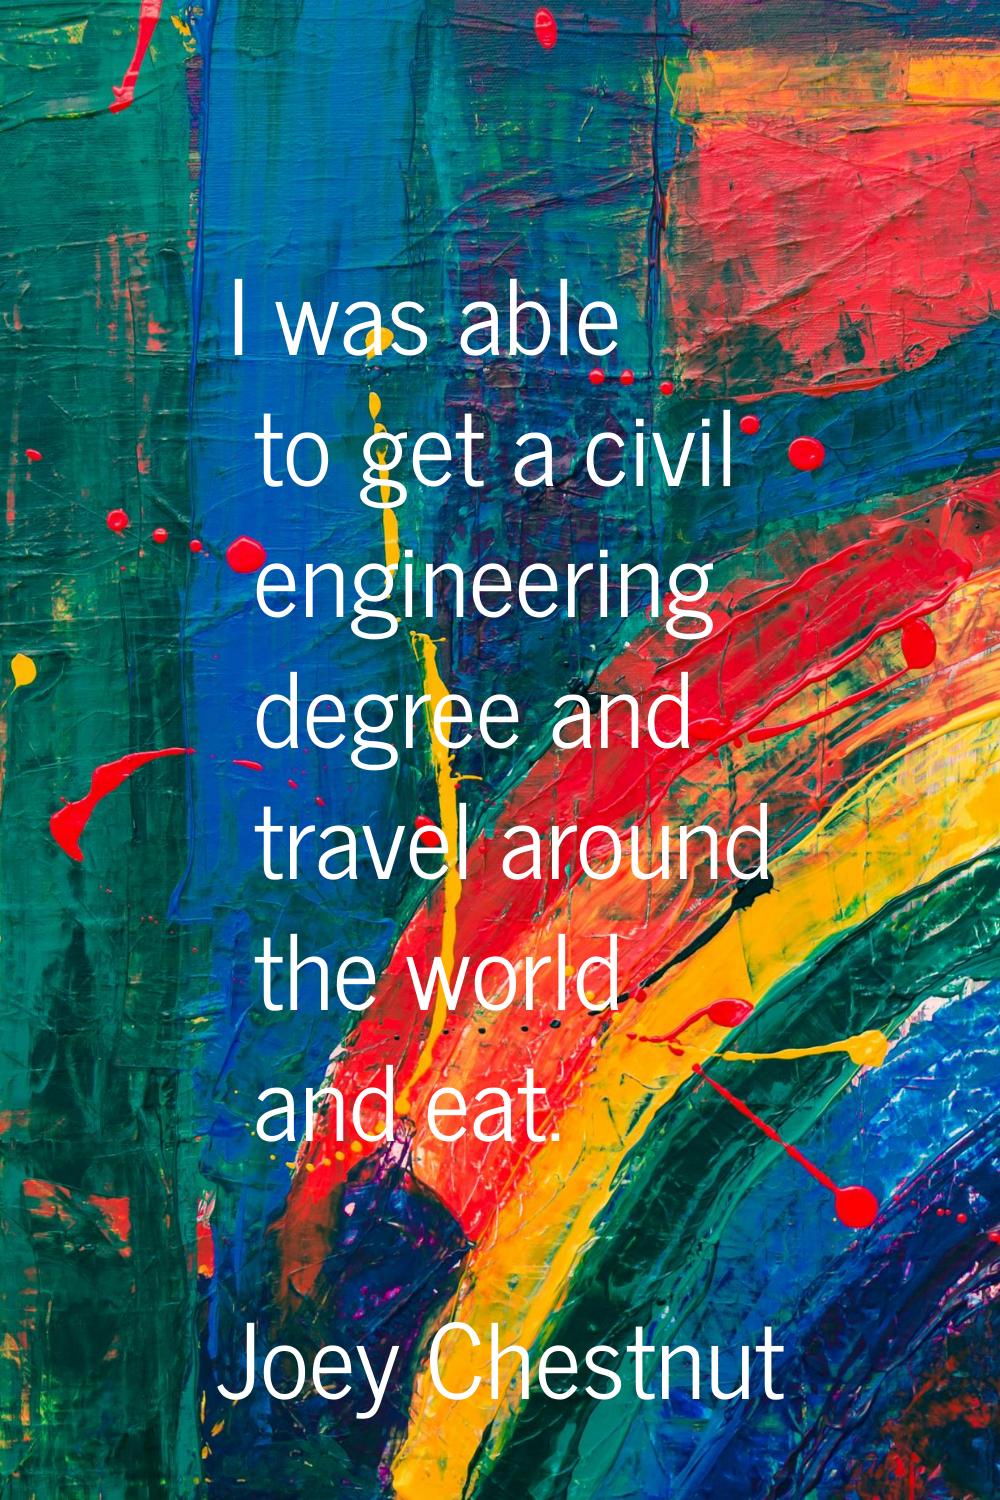 I was able to get a civil engineering degree and travel around the world and eat.